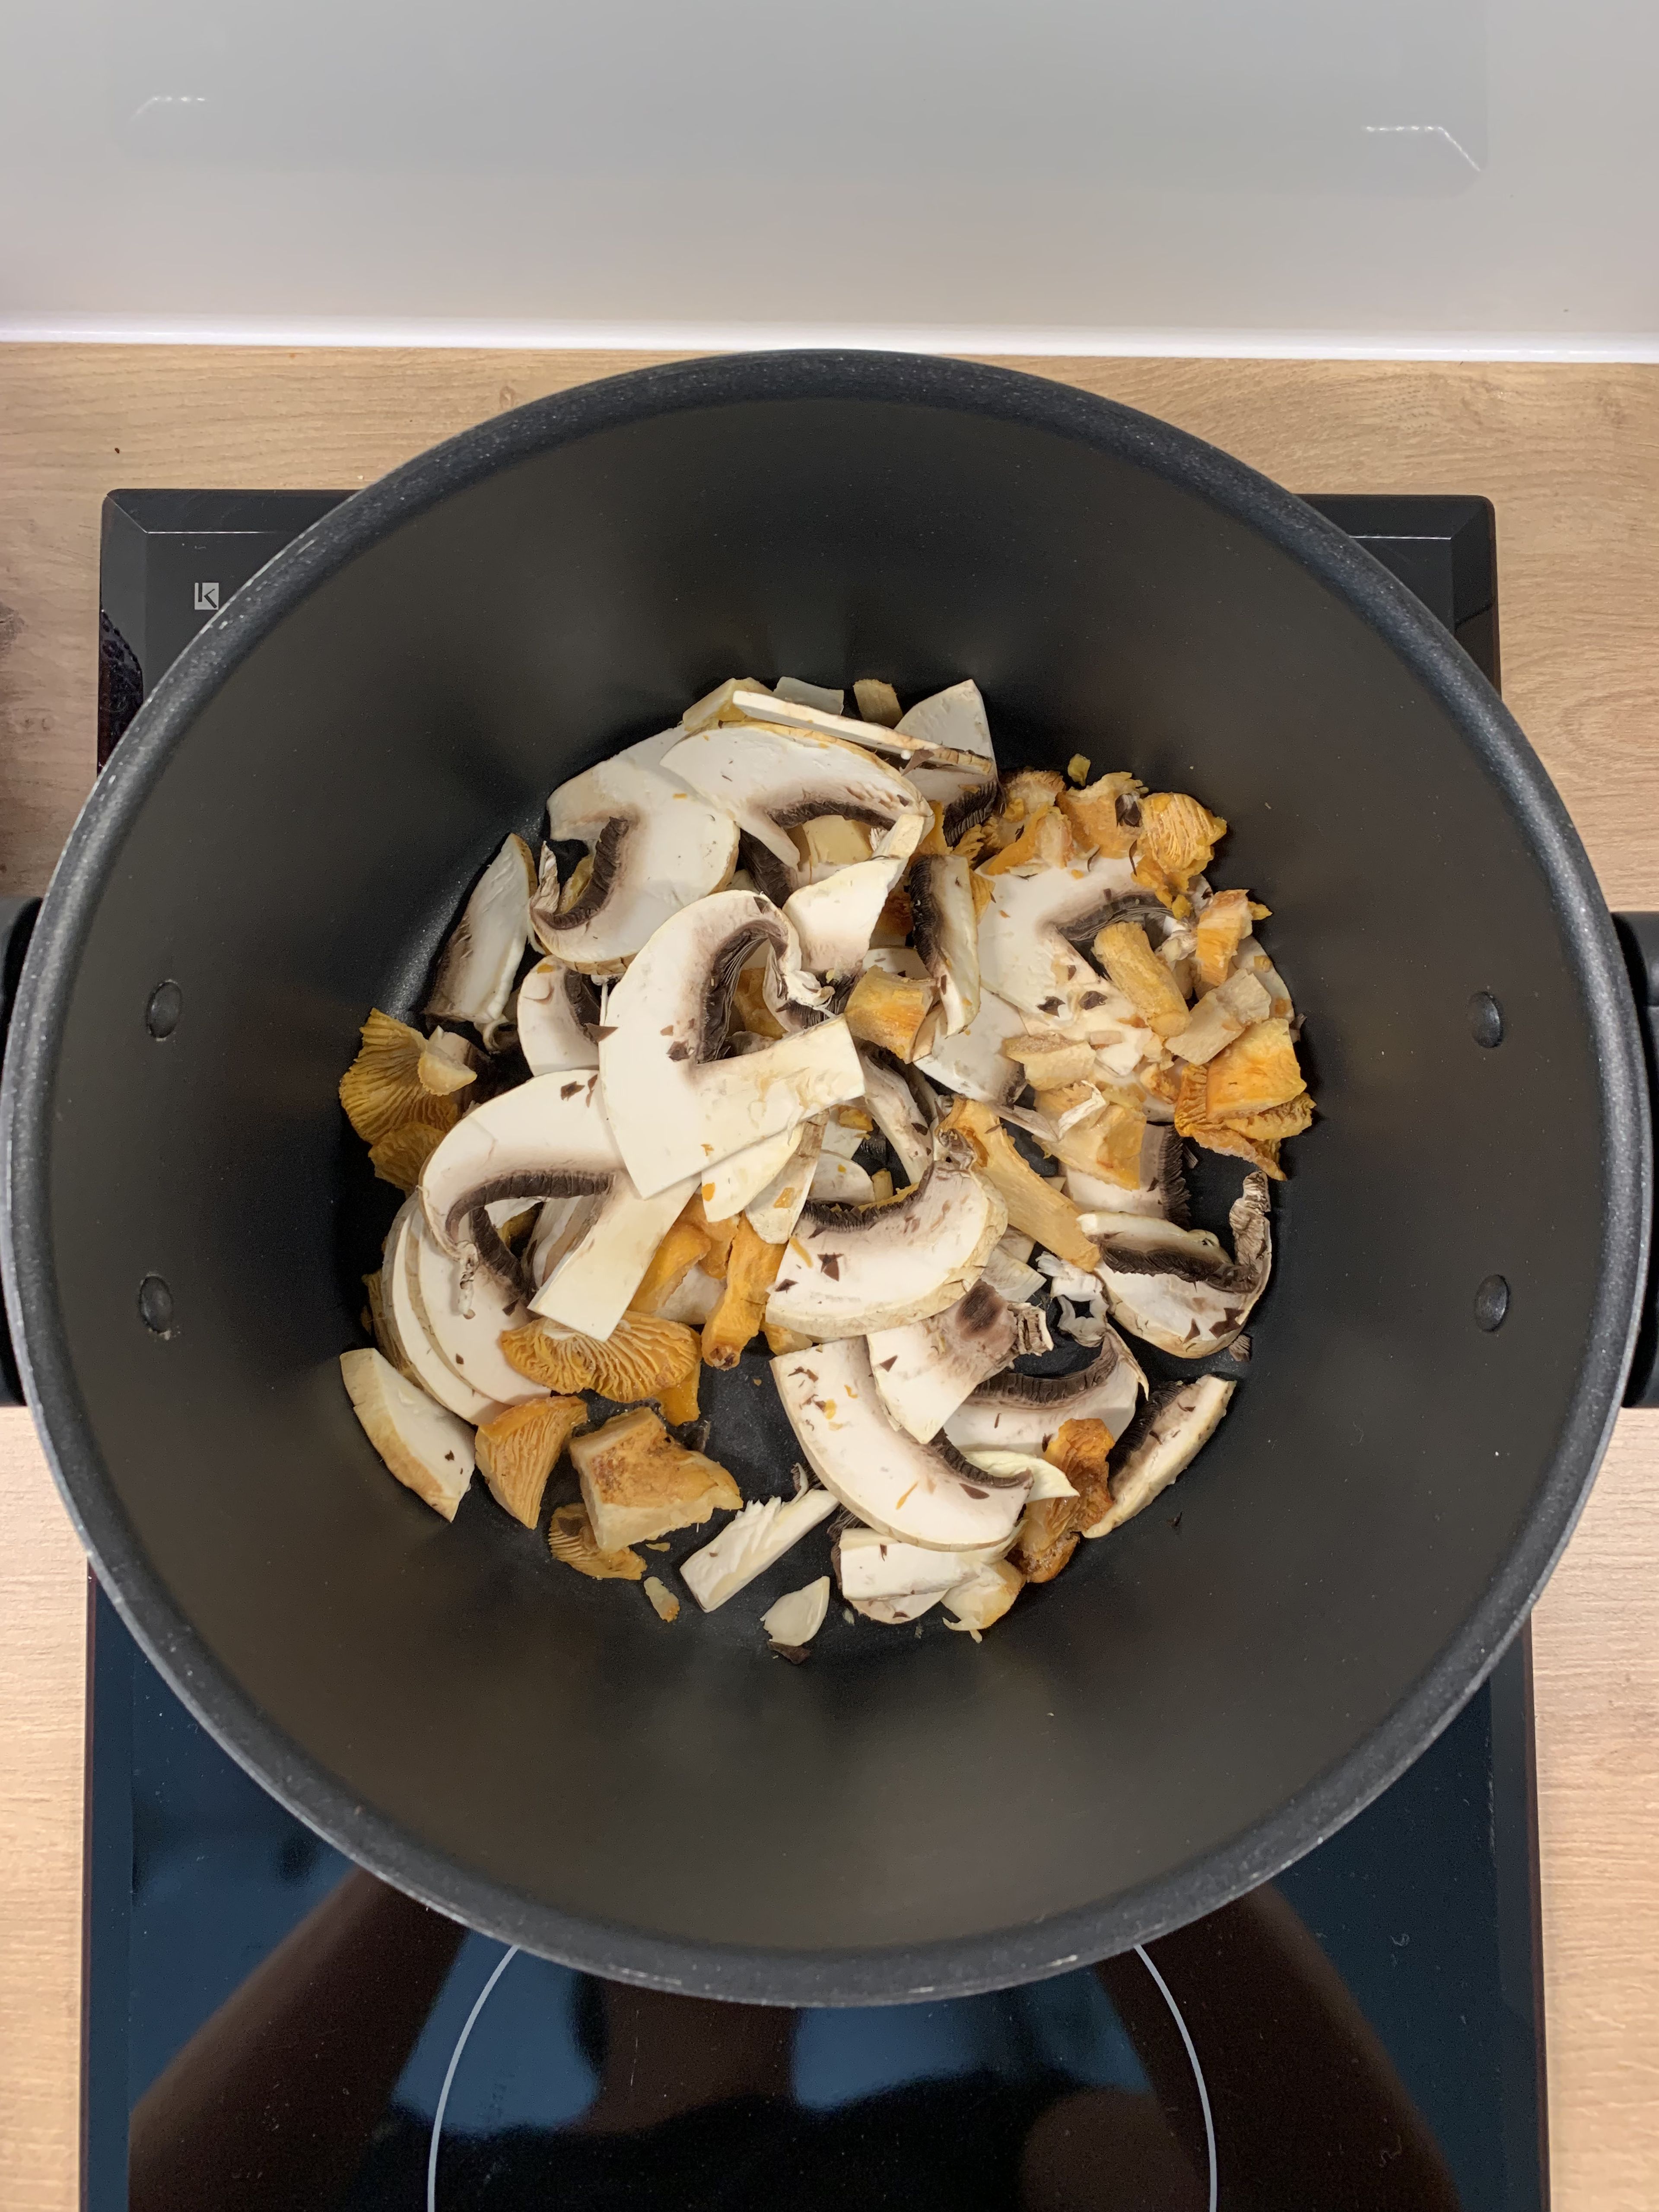 Cut the fresh mushrooms into slices and brown them. Douse them with the lemon juice. If you use dried mushrooms, some them in hot water. 